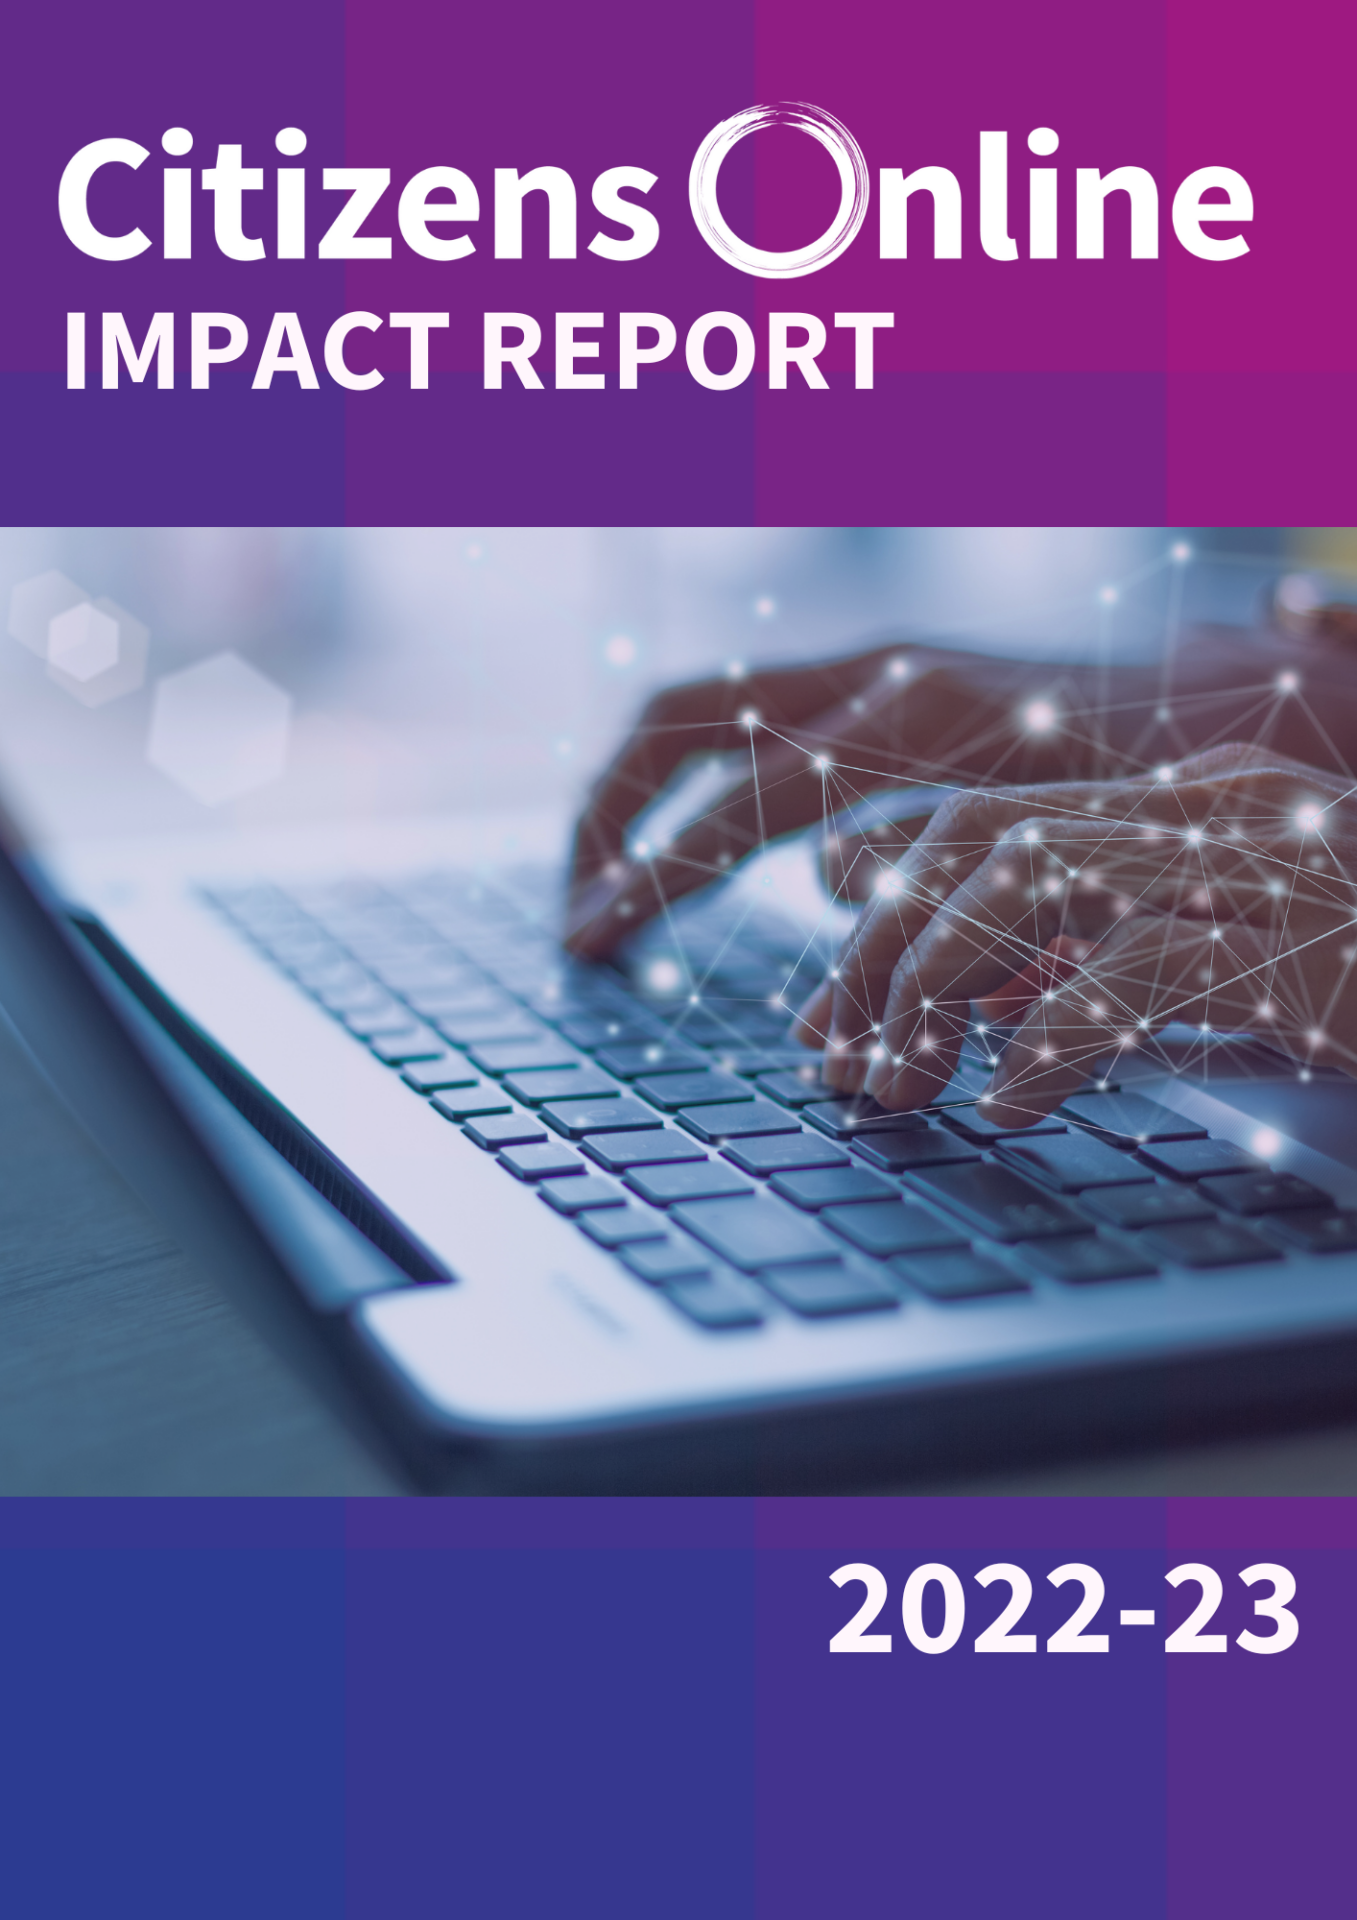 Cover of Citizens Online Impact Report showing hands typing on keyboard